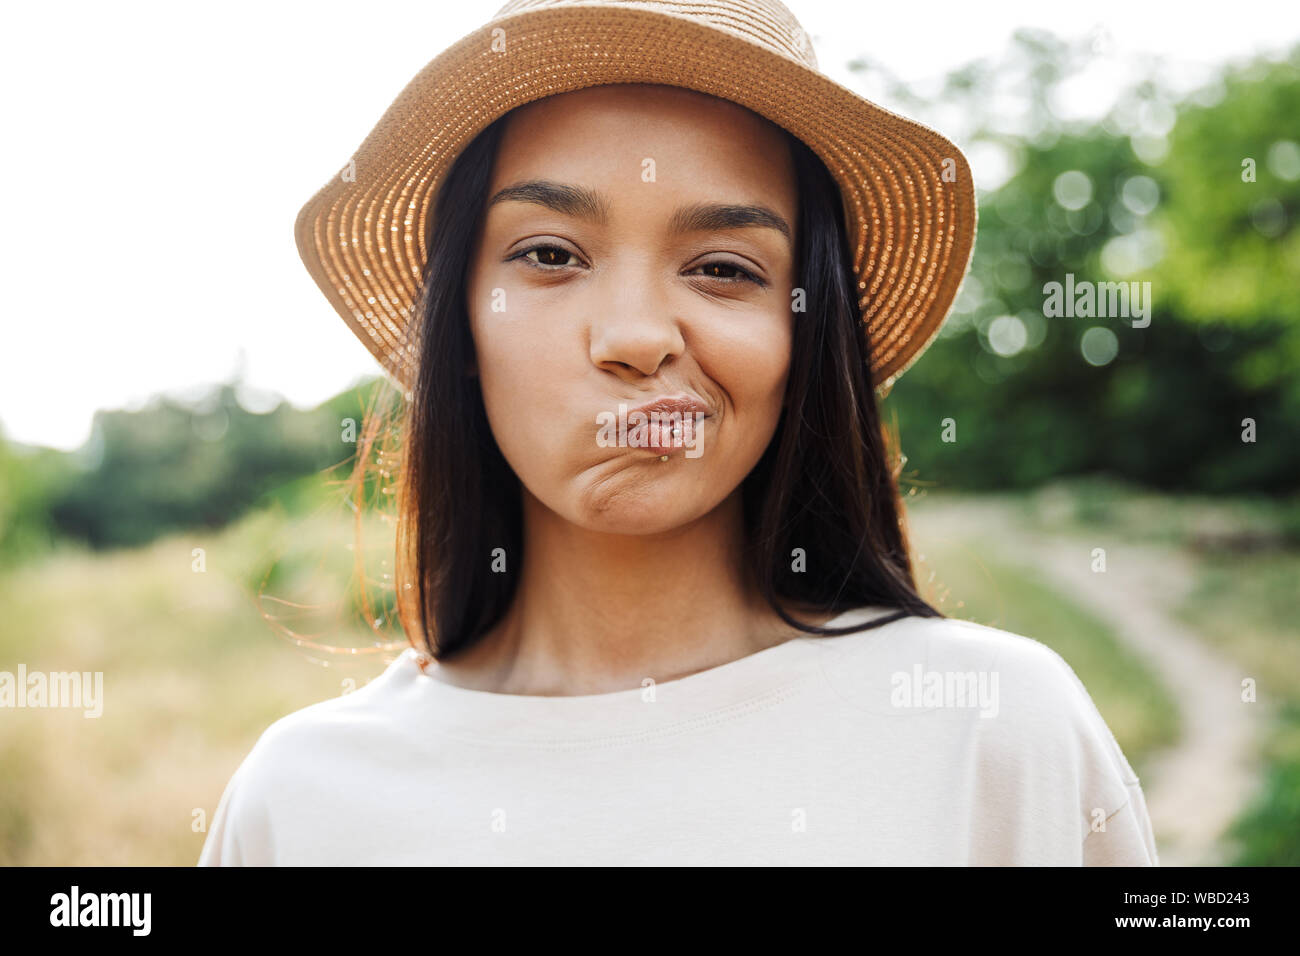 Photo of caucasian woman wearing straw hat and lip piercing twisting her mouth while walking in green park Stock Photo